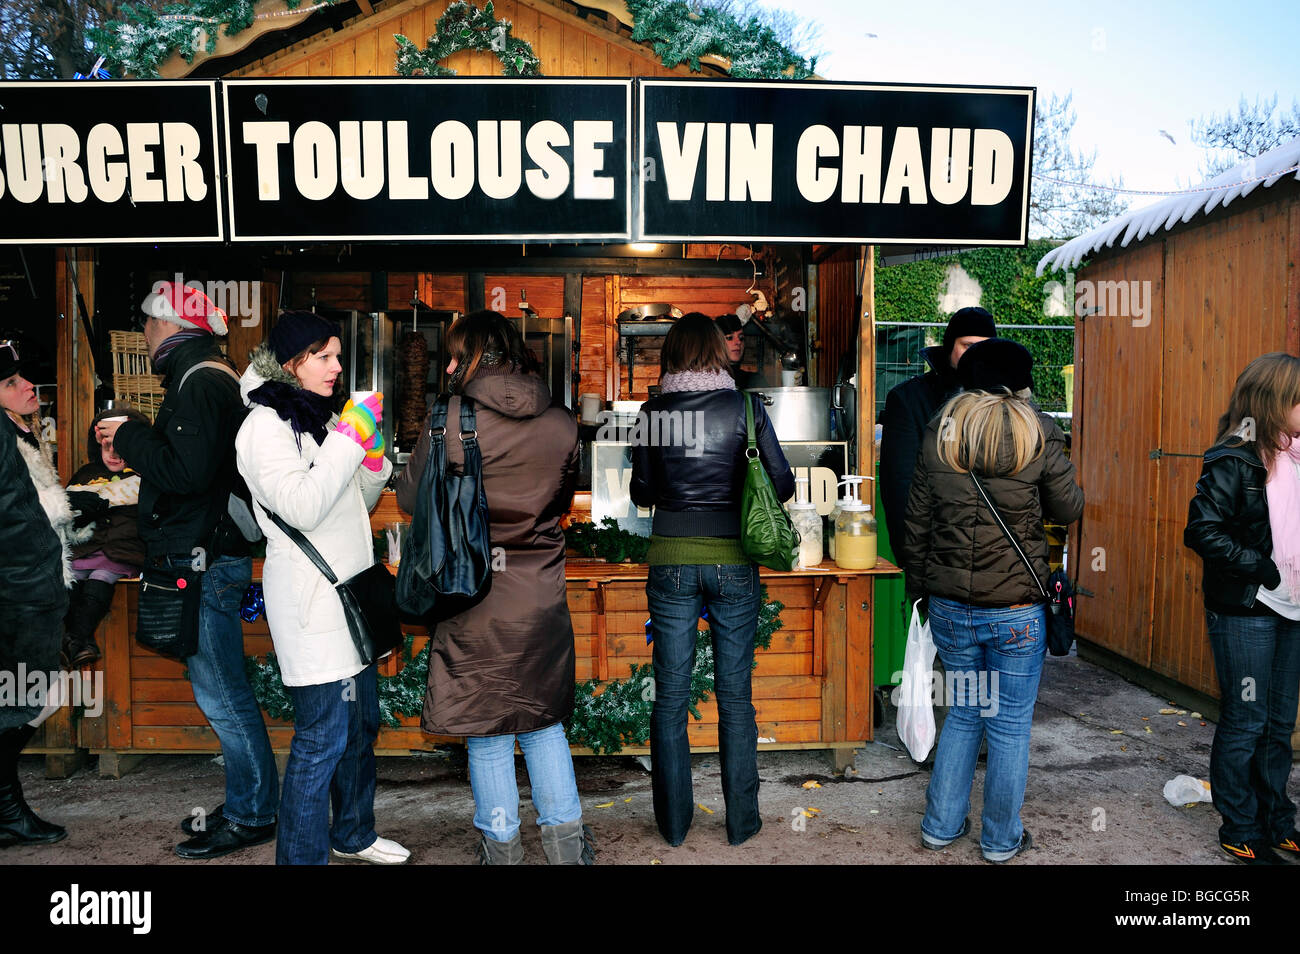 Paris, France, Street Vendor, Medium Group French People Sharing Drinks, Hot Christmas Wine at Traditional Street Vendor, Public Market, Outdoors Stock Photo